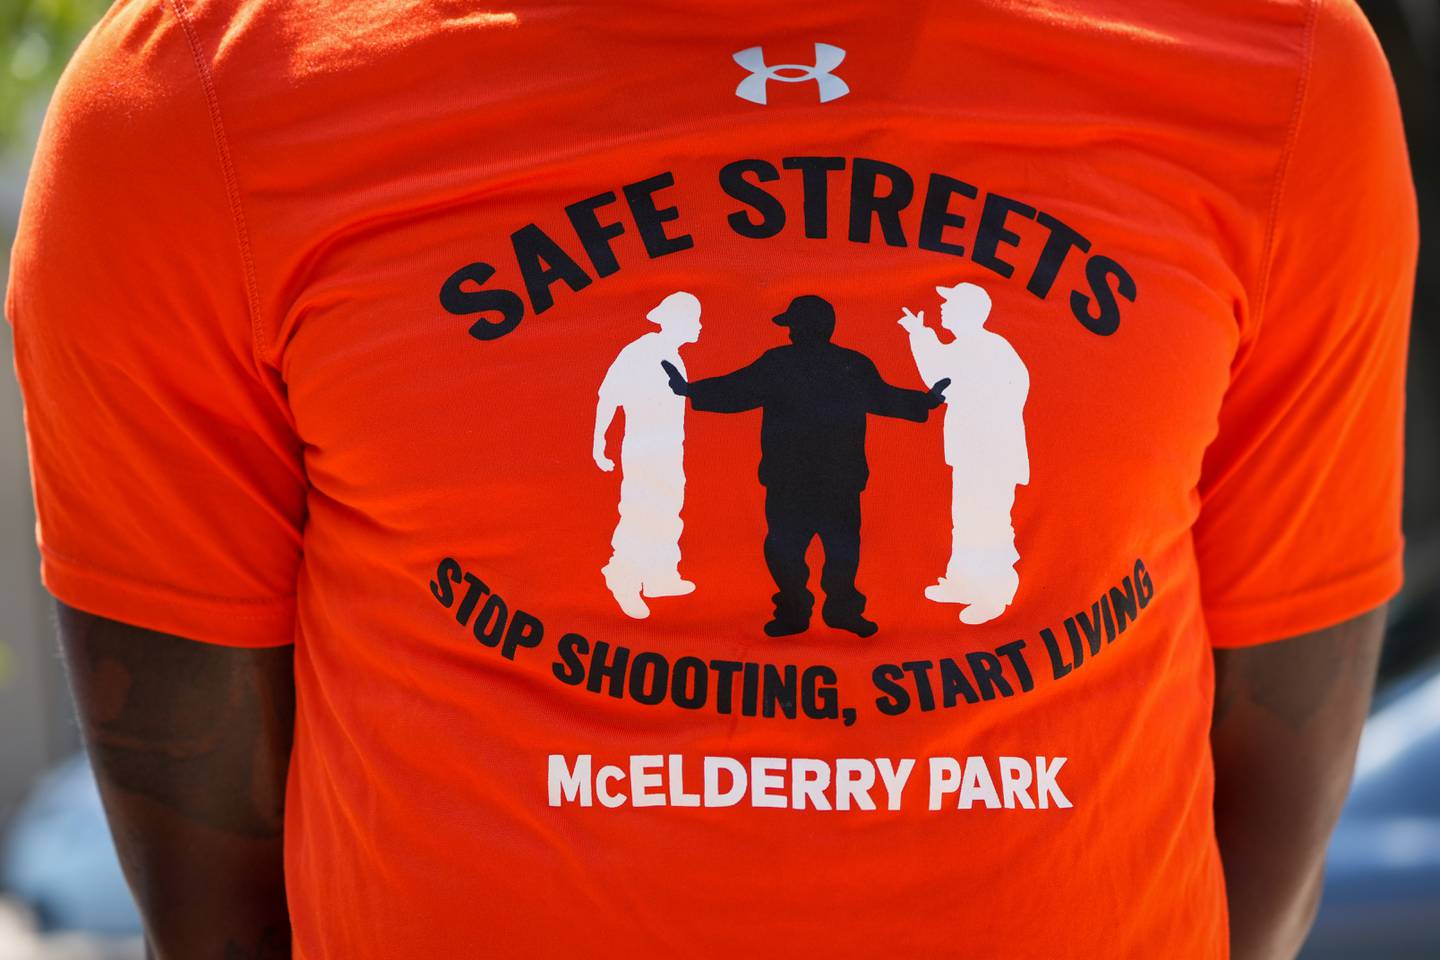 A man wearing a Safe Streets shirt stands to the side as officials speak at a press conference outside Tench Tilghman Elementary/Middle School on 8/24/22.